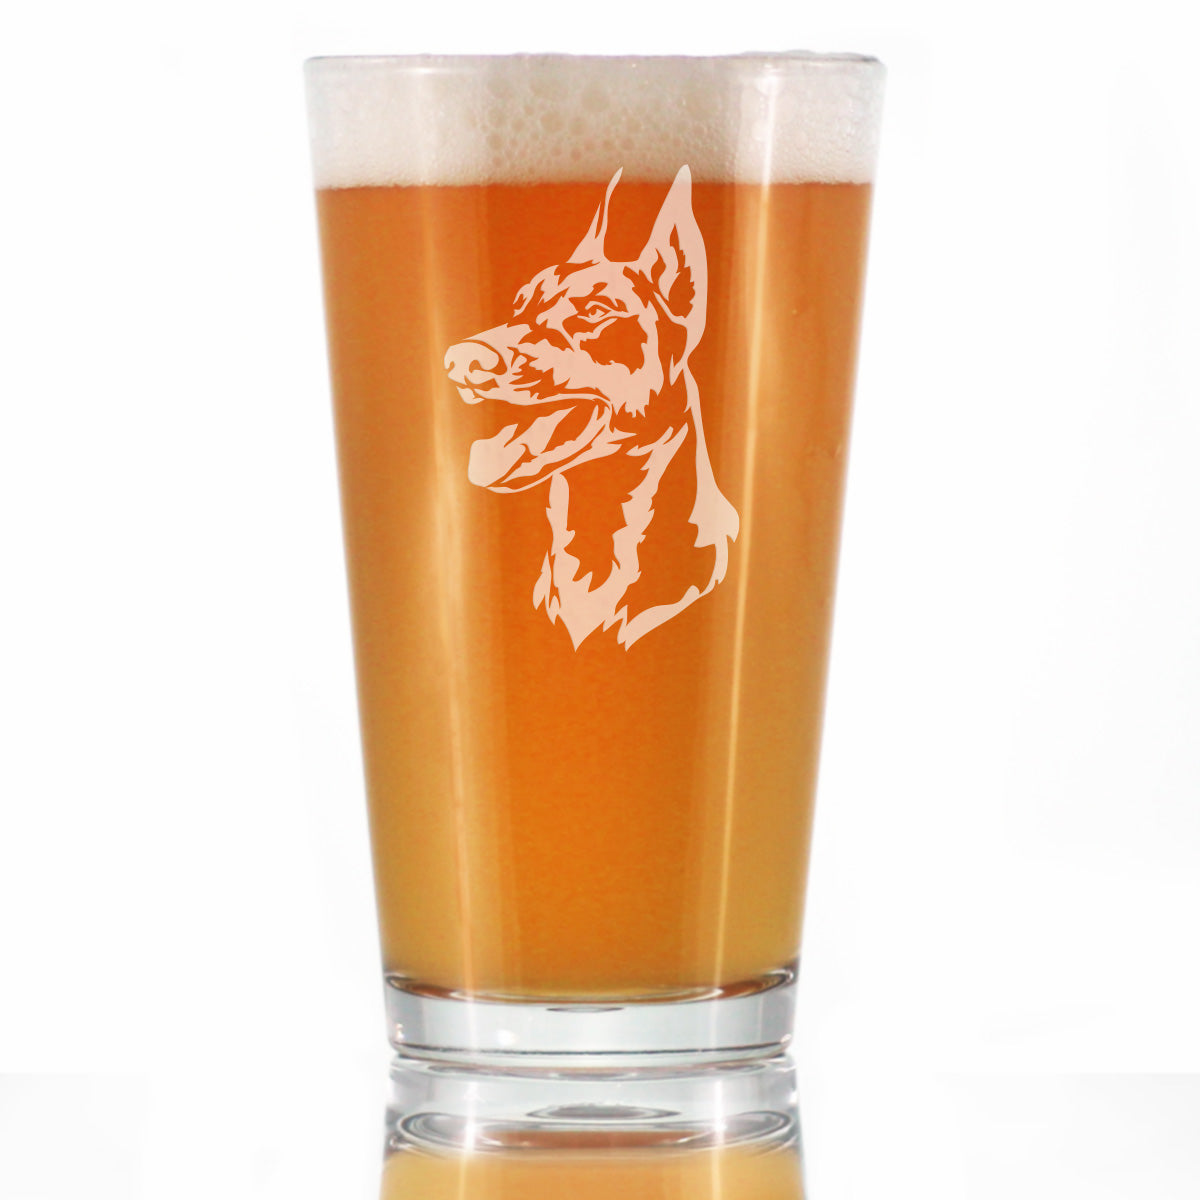 Doberman Face Pint Glass for Beer - Unique Dog Themed Decor and Gifts for Moms &amp; Dads of Pinscher Dobermans - 16 Oz